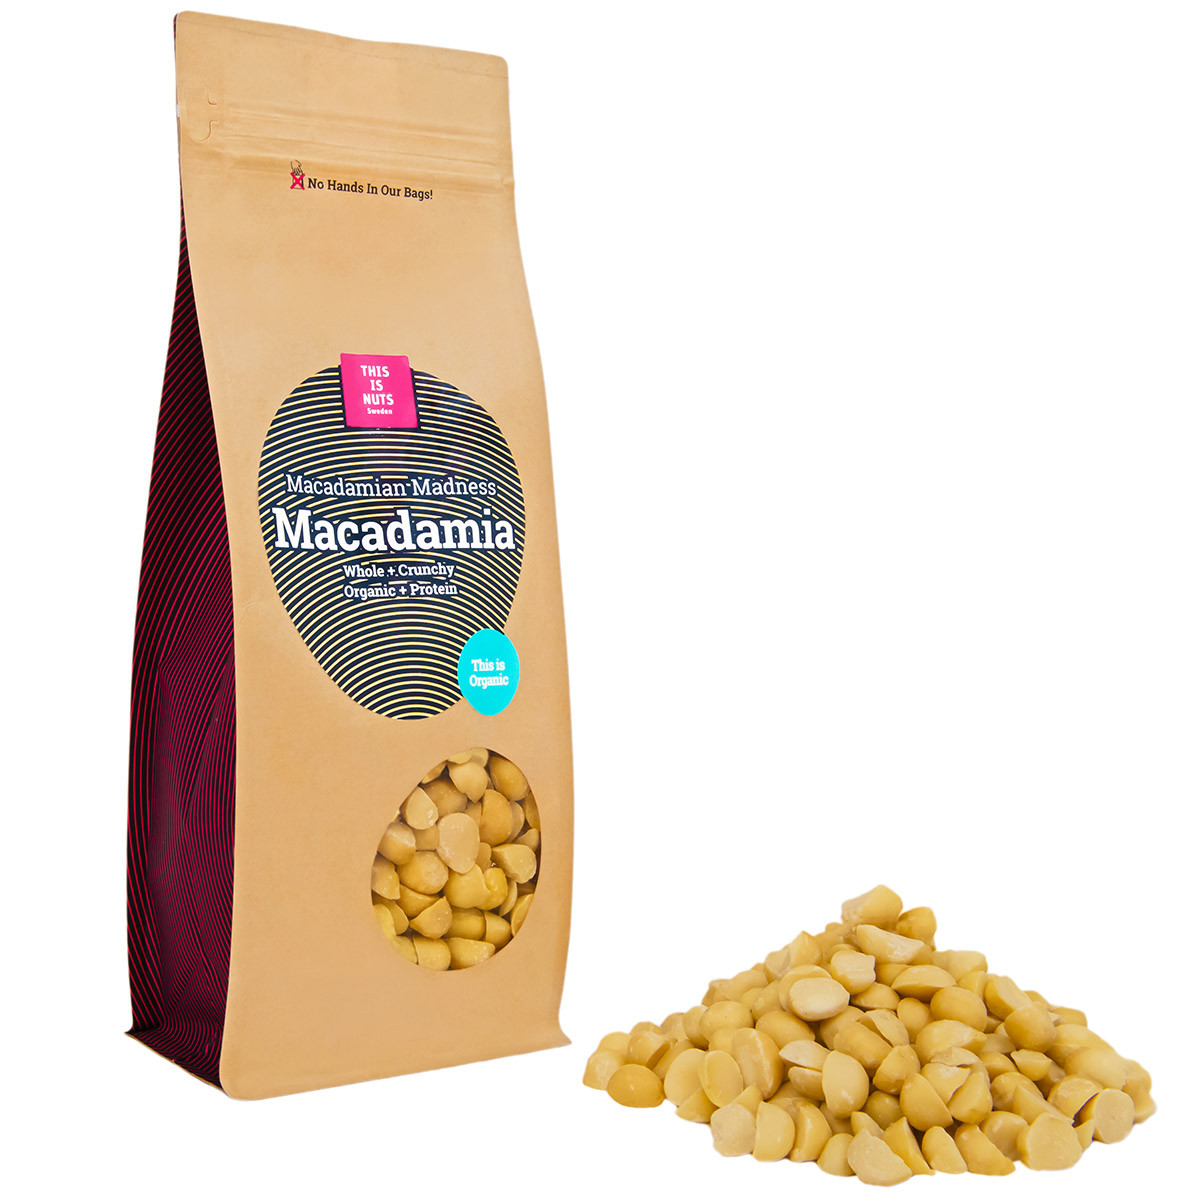 This is nuts Sweden Macadamian Madness Macadamia 300g